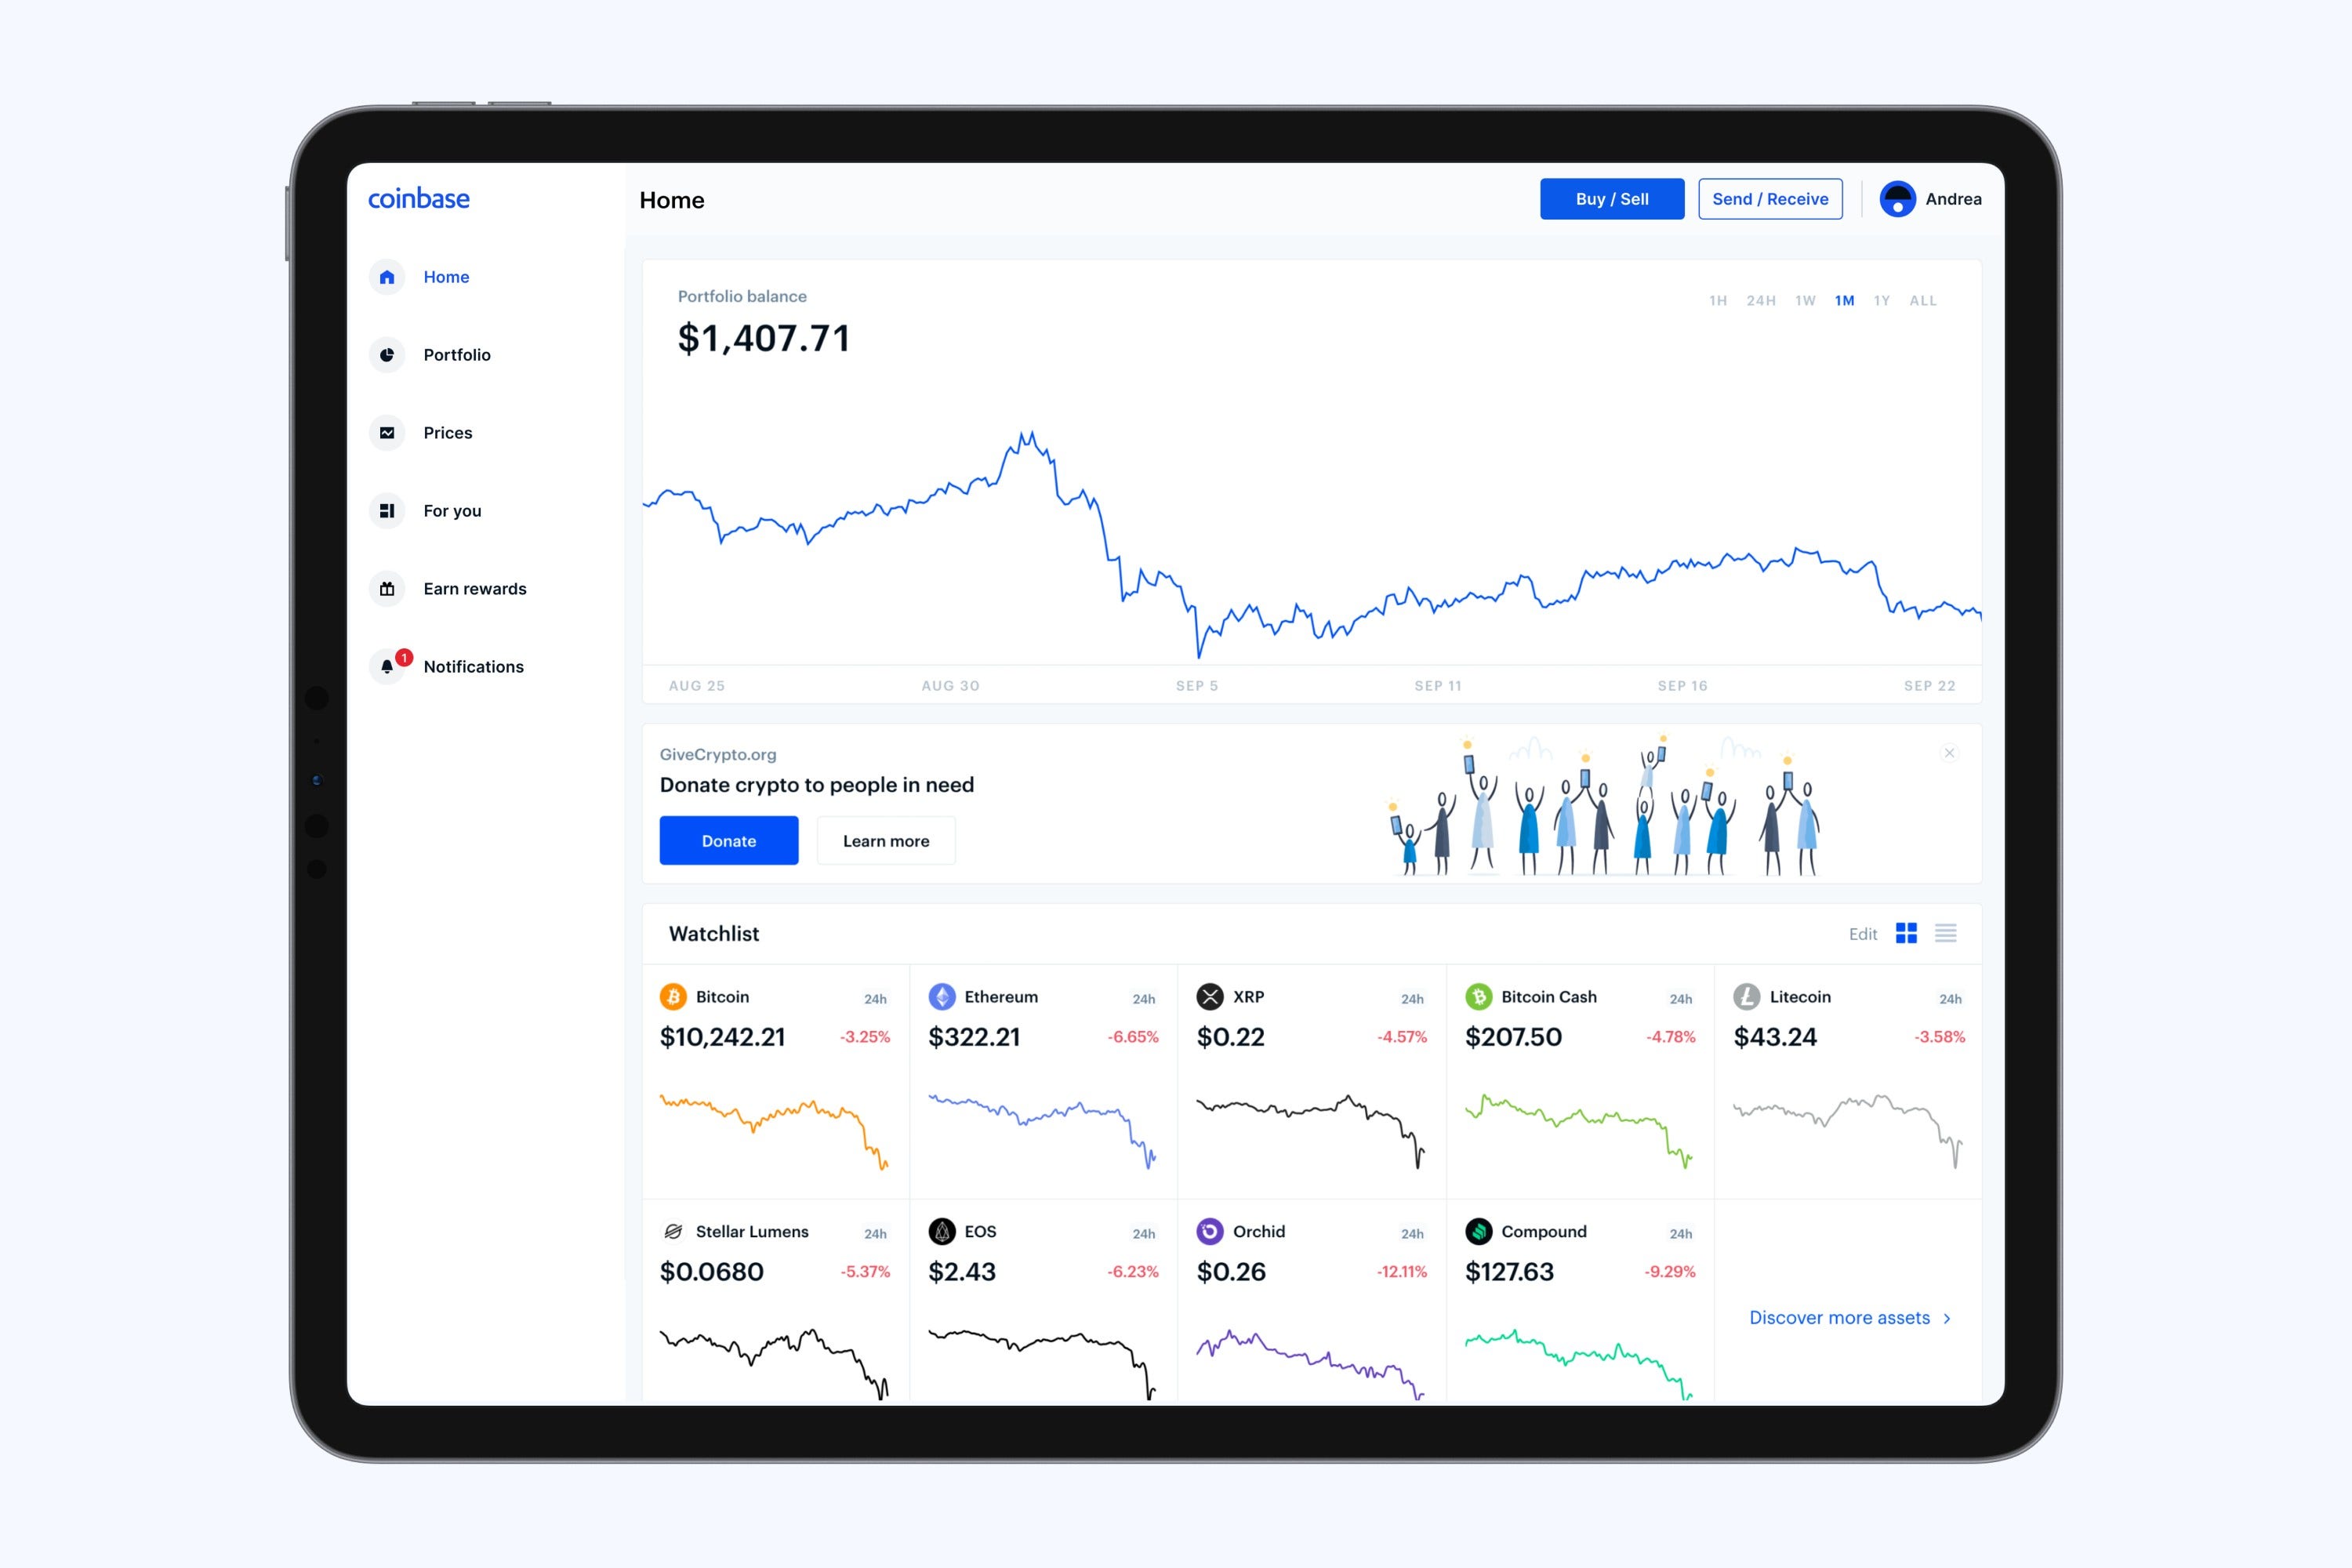 Coinbase Customers Are 'HODLing' While Company Cuts Costs: What 5 Analysts Are Saying After Q3 Earnings